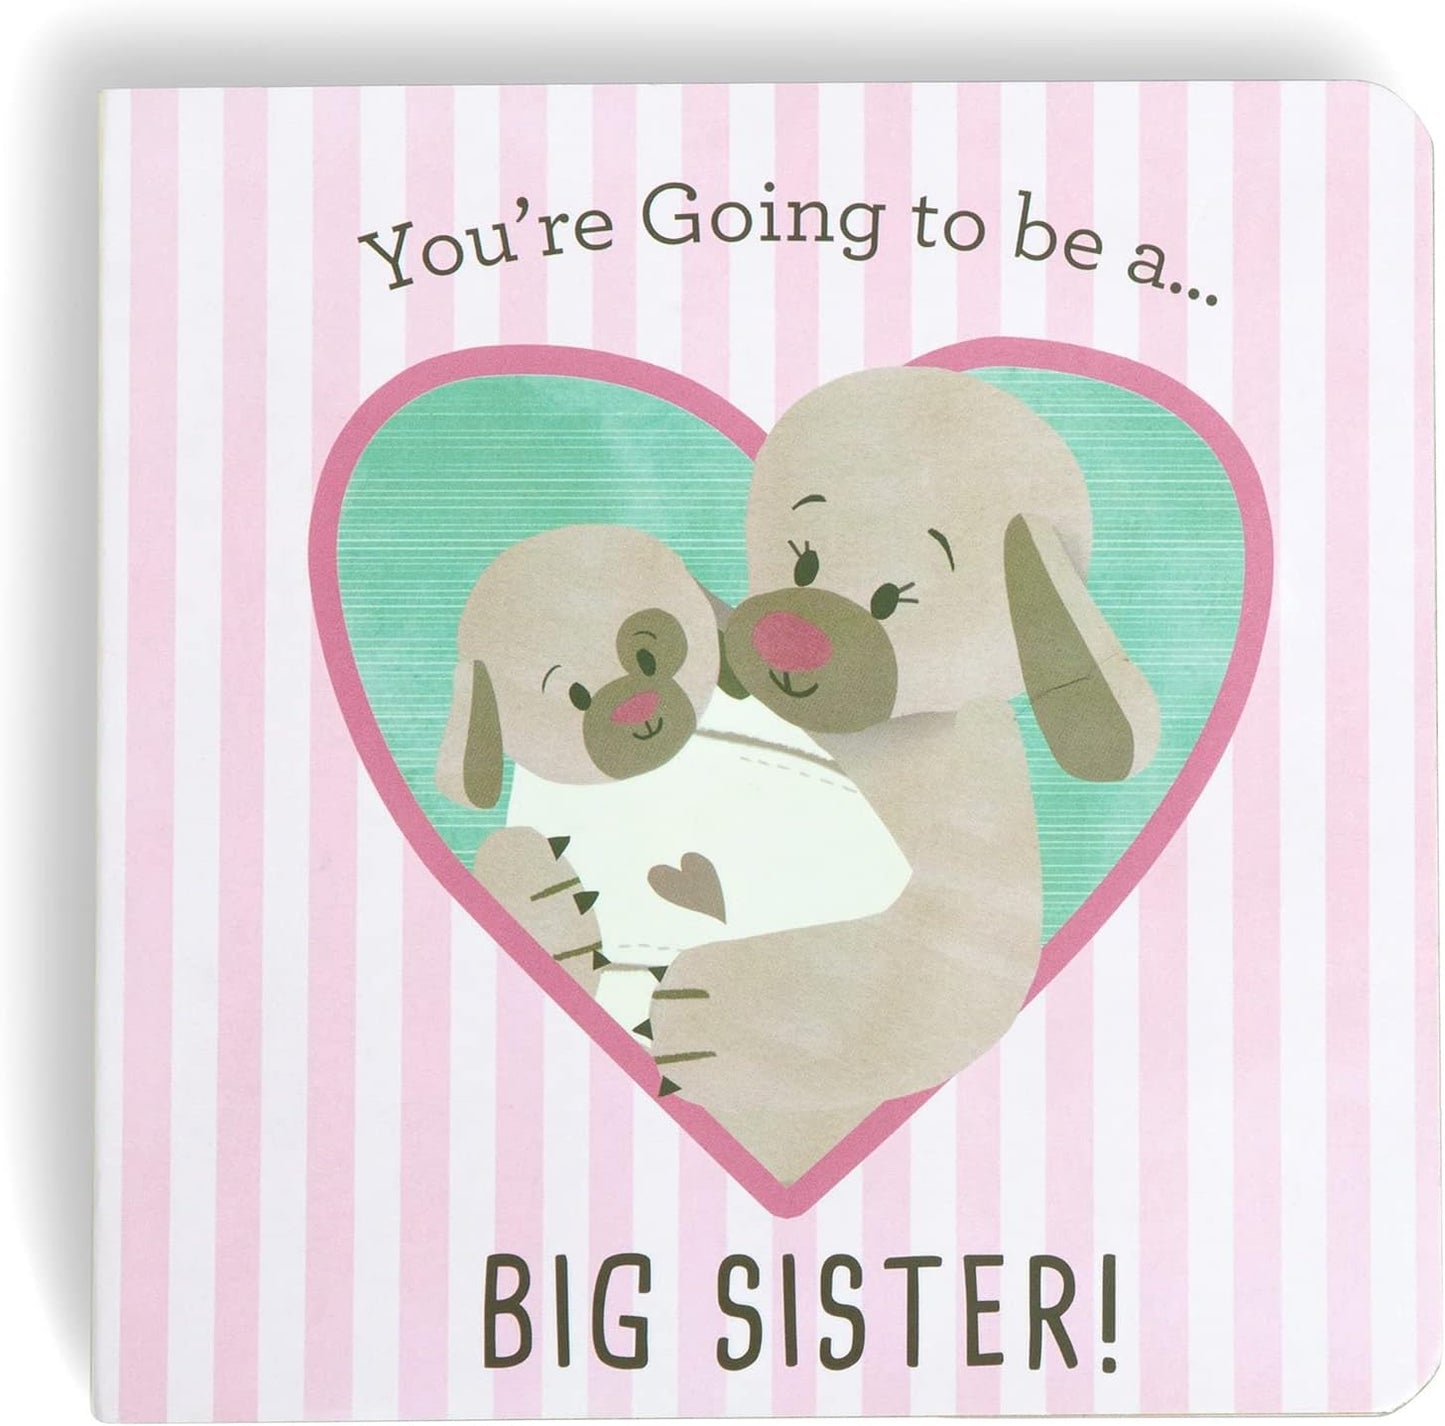 You're Going To Be A Big Sister